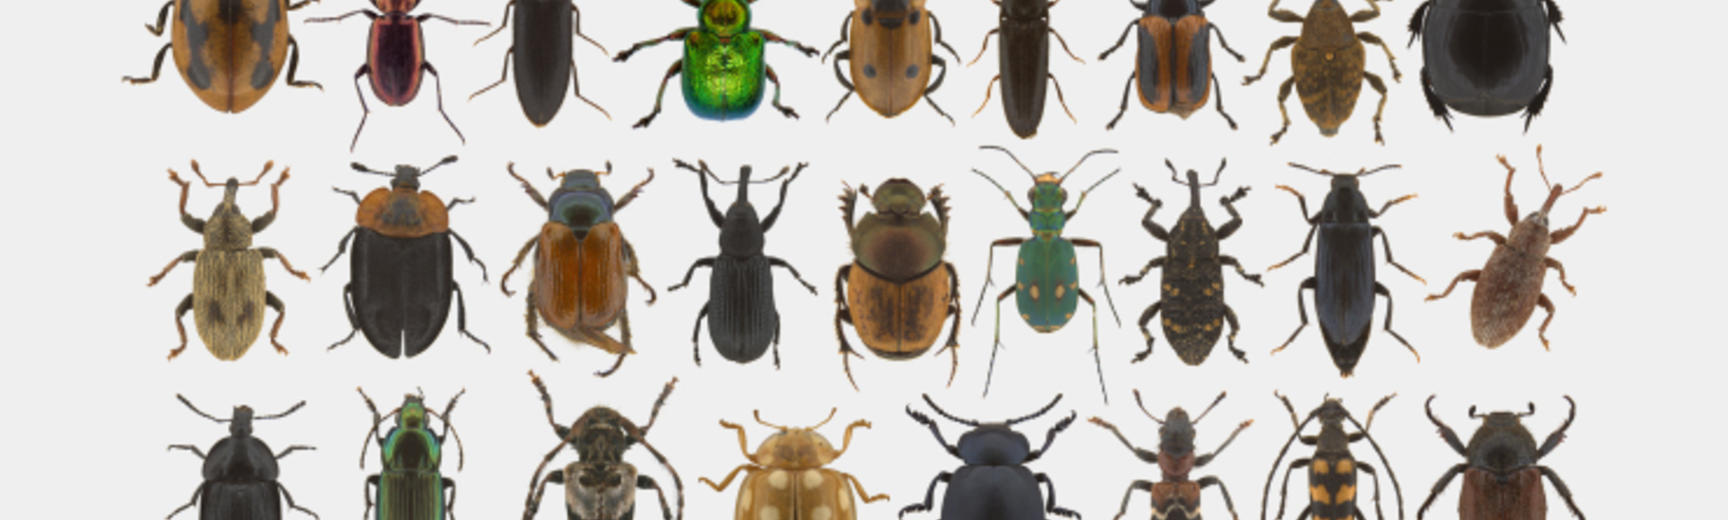 A collections of colourful British insects, unique-beetle fauna of Witherslack in Cumbria UK.